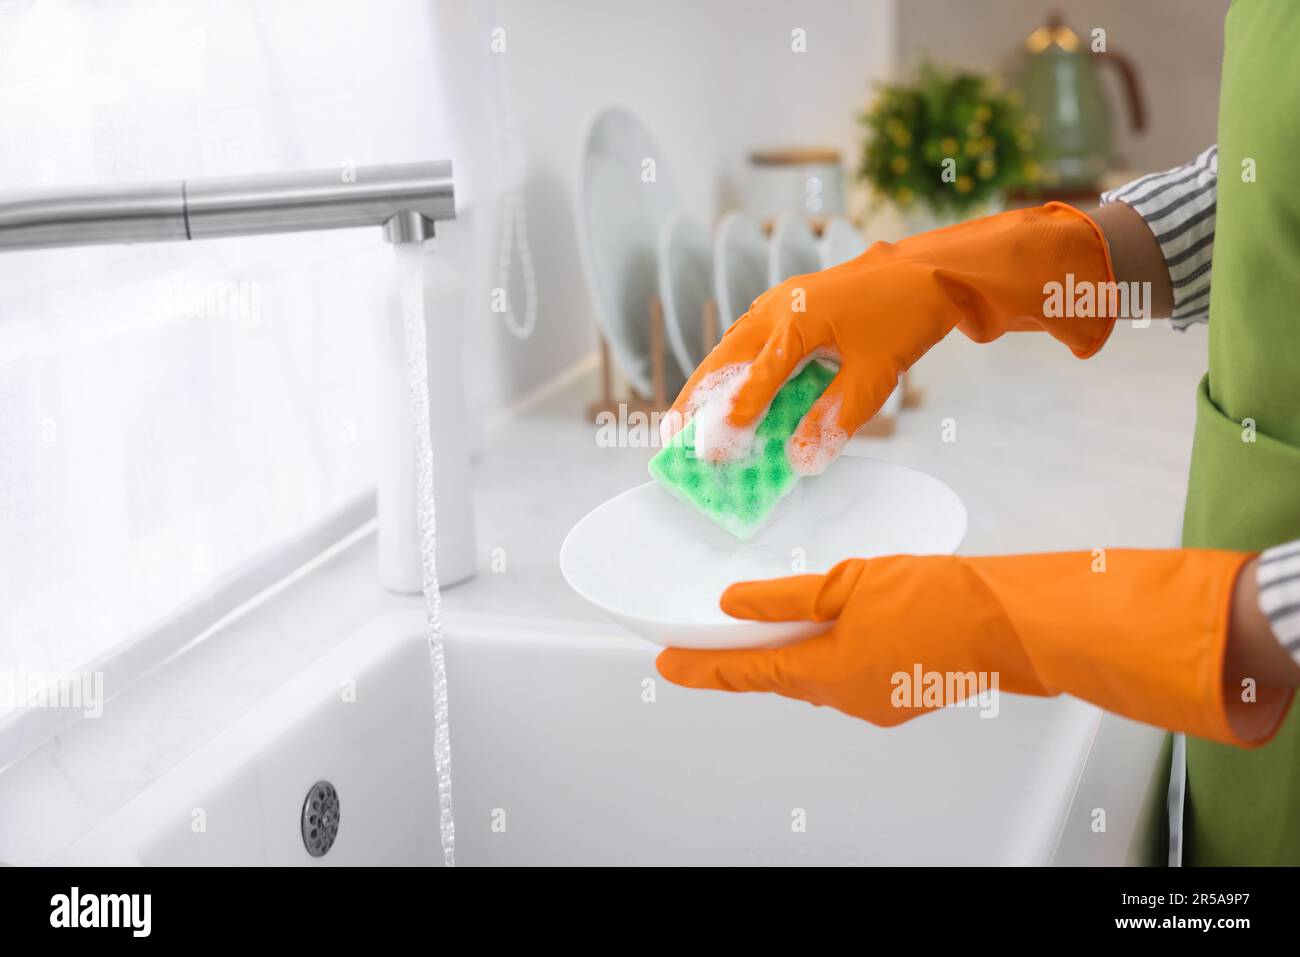 Gloves, Sponge and Brush in a Clean Kitchen Sink Stock Image - Image of  chores, bright: 28035171